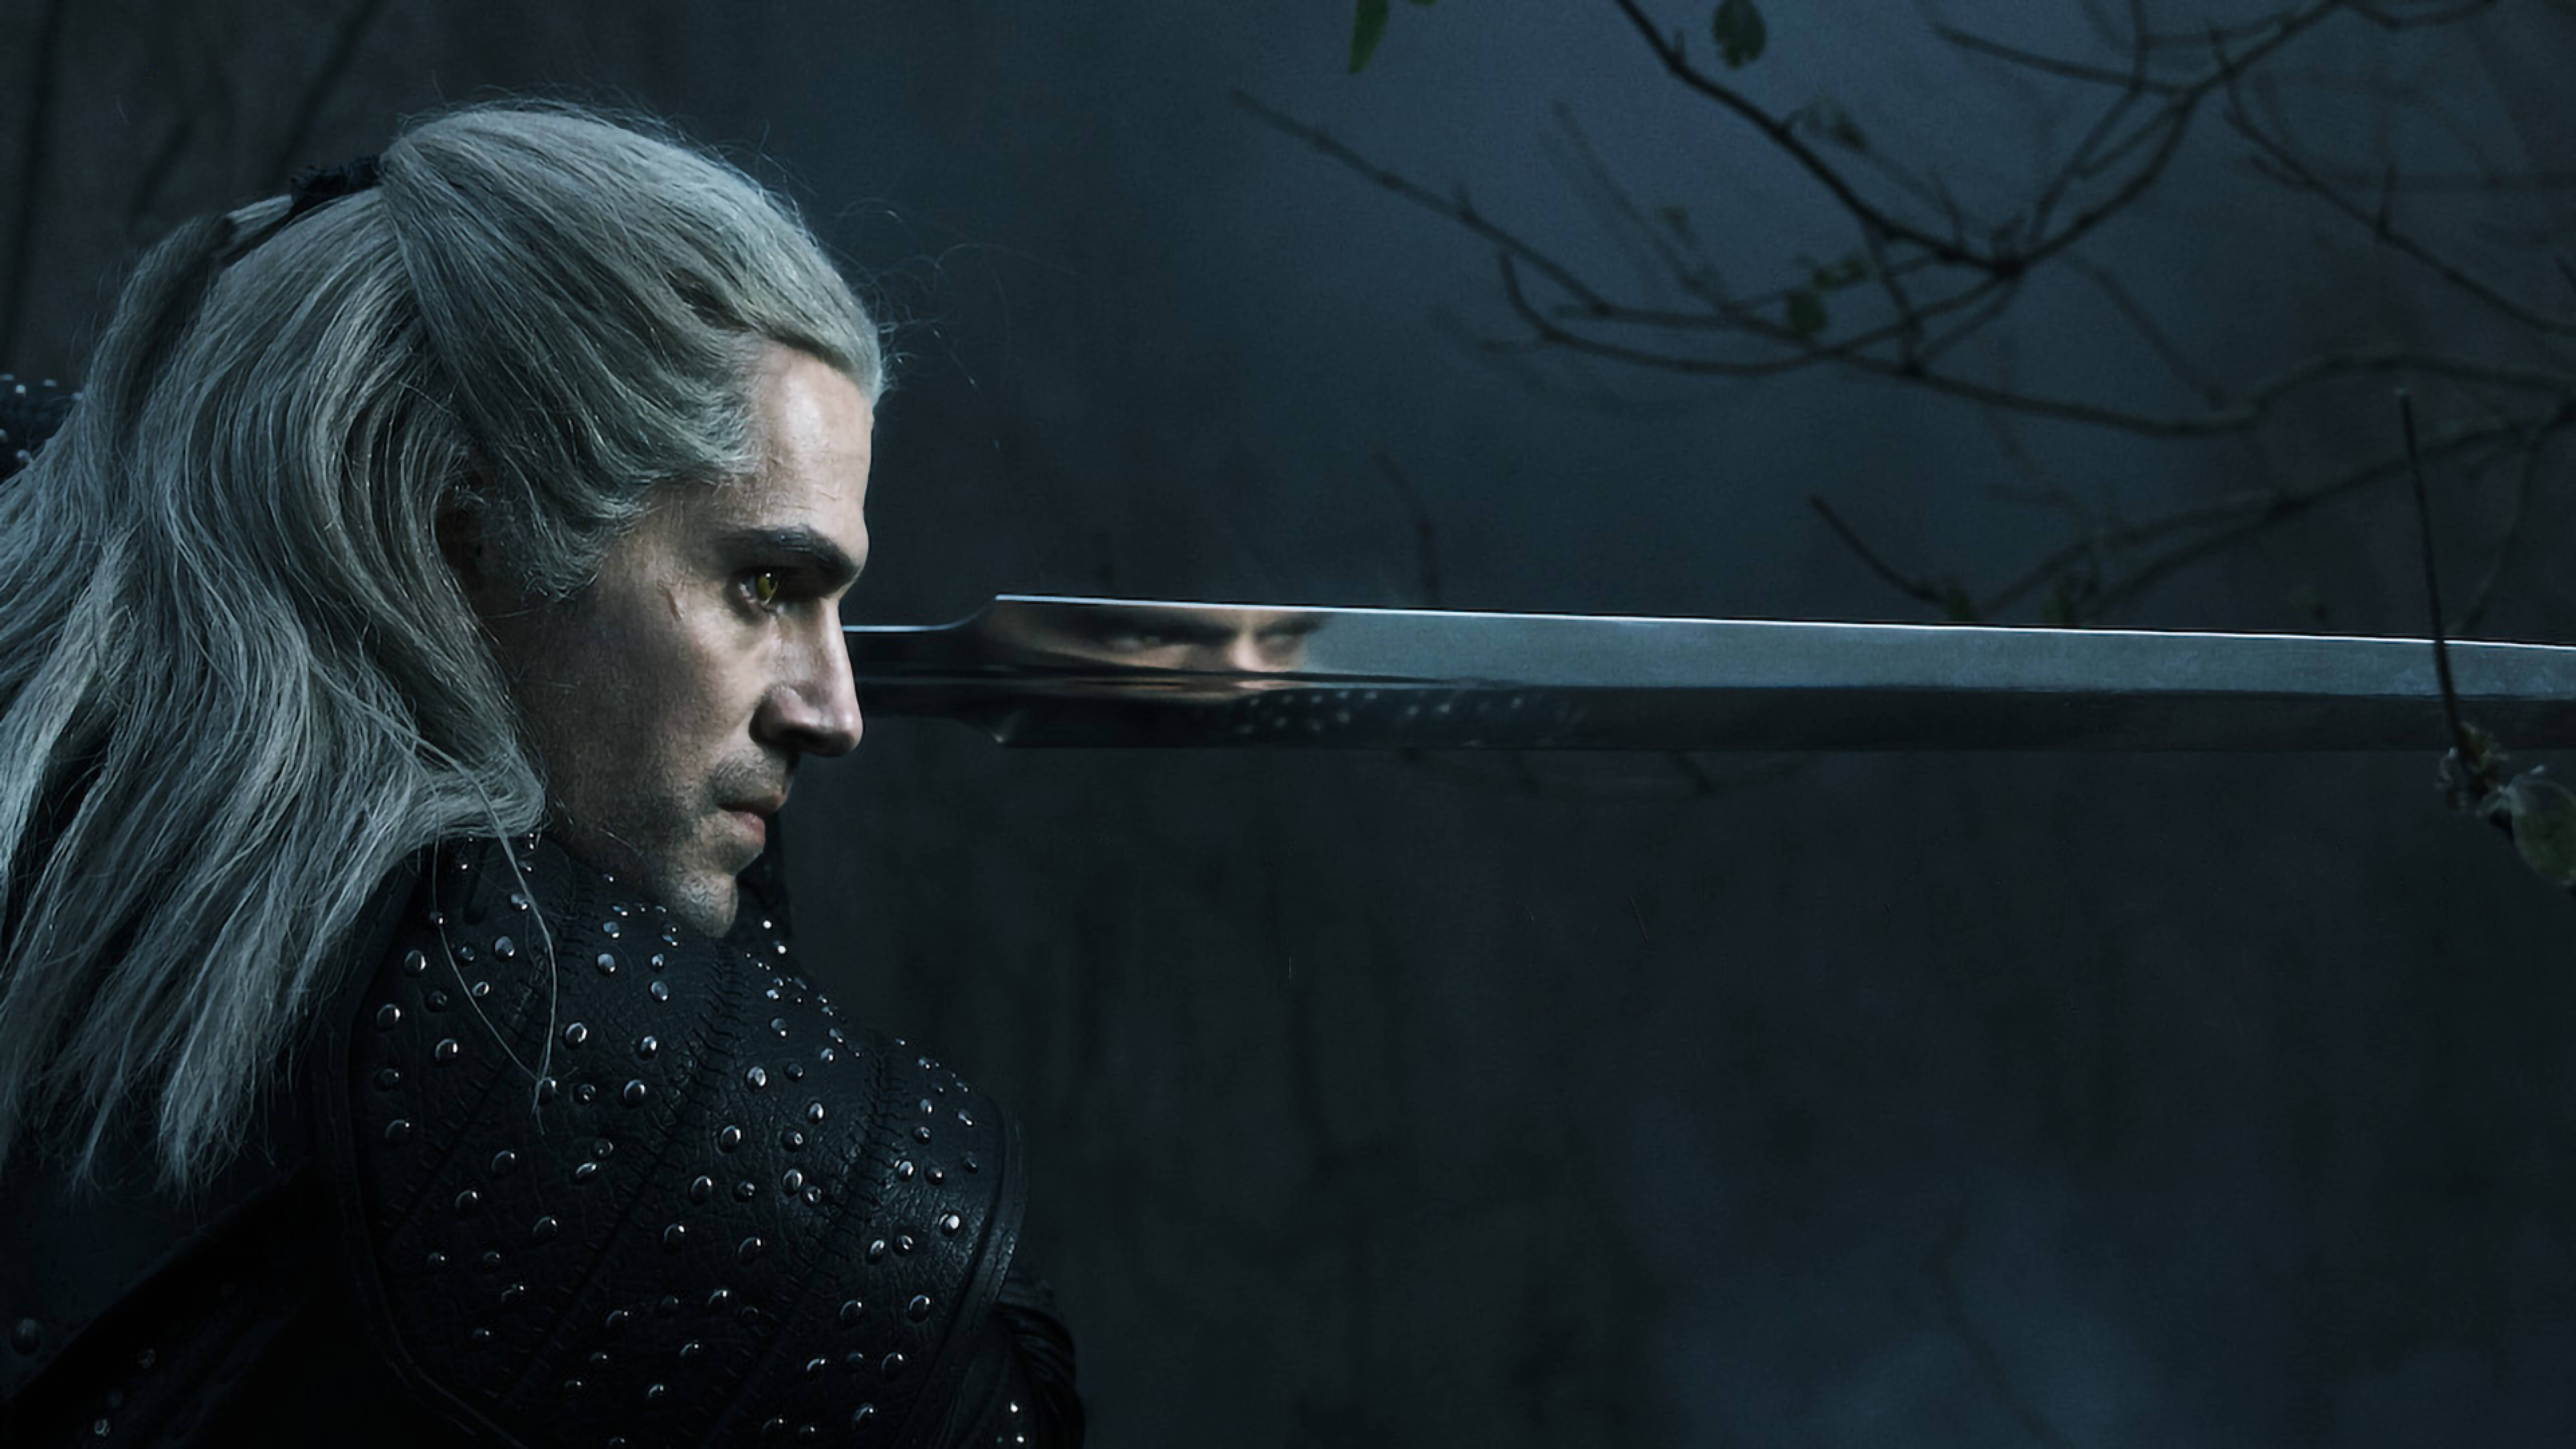 Cool Netflix The Witcher 8K Wallpaper, HD TV Series 4K Wallpaper, Image, Photo and Background